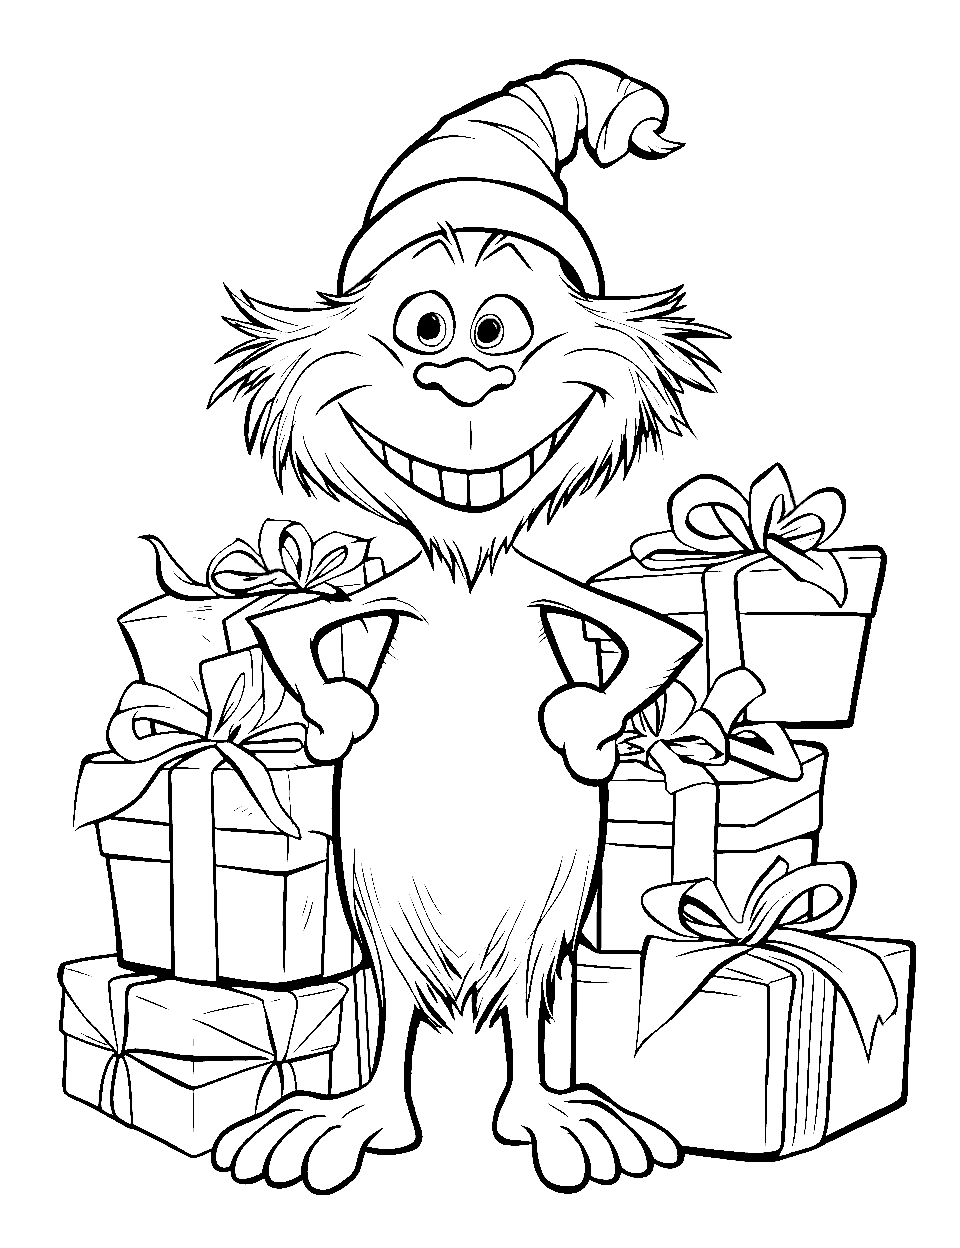 Gift Filled Surprise Coloring Page - The Grinch with tons of gifts ready for handouts.